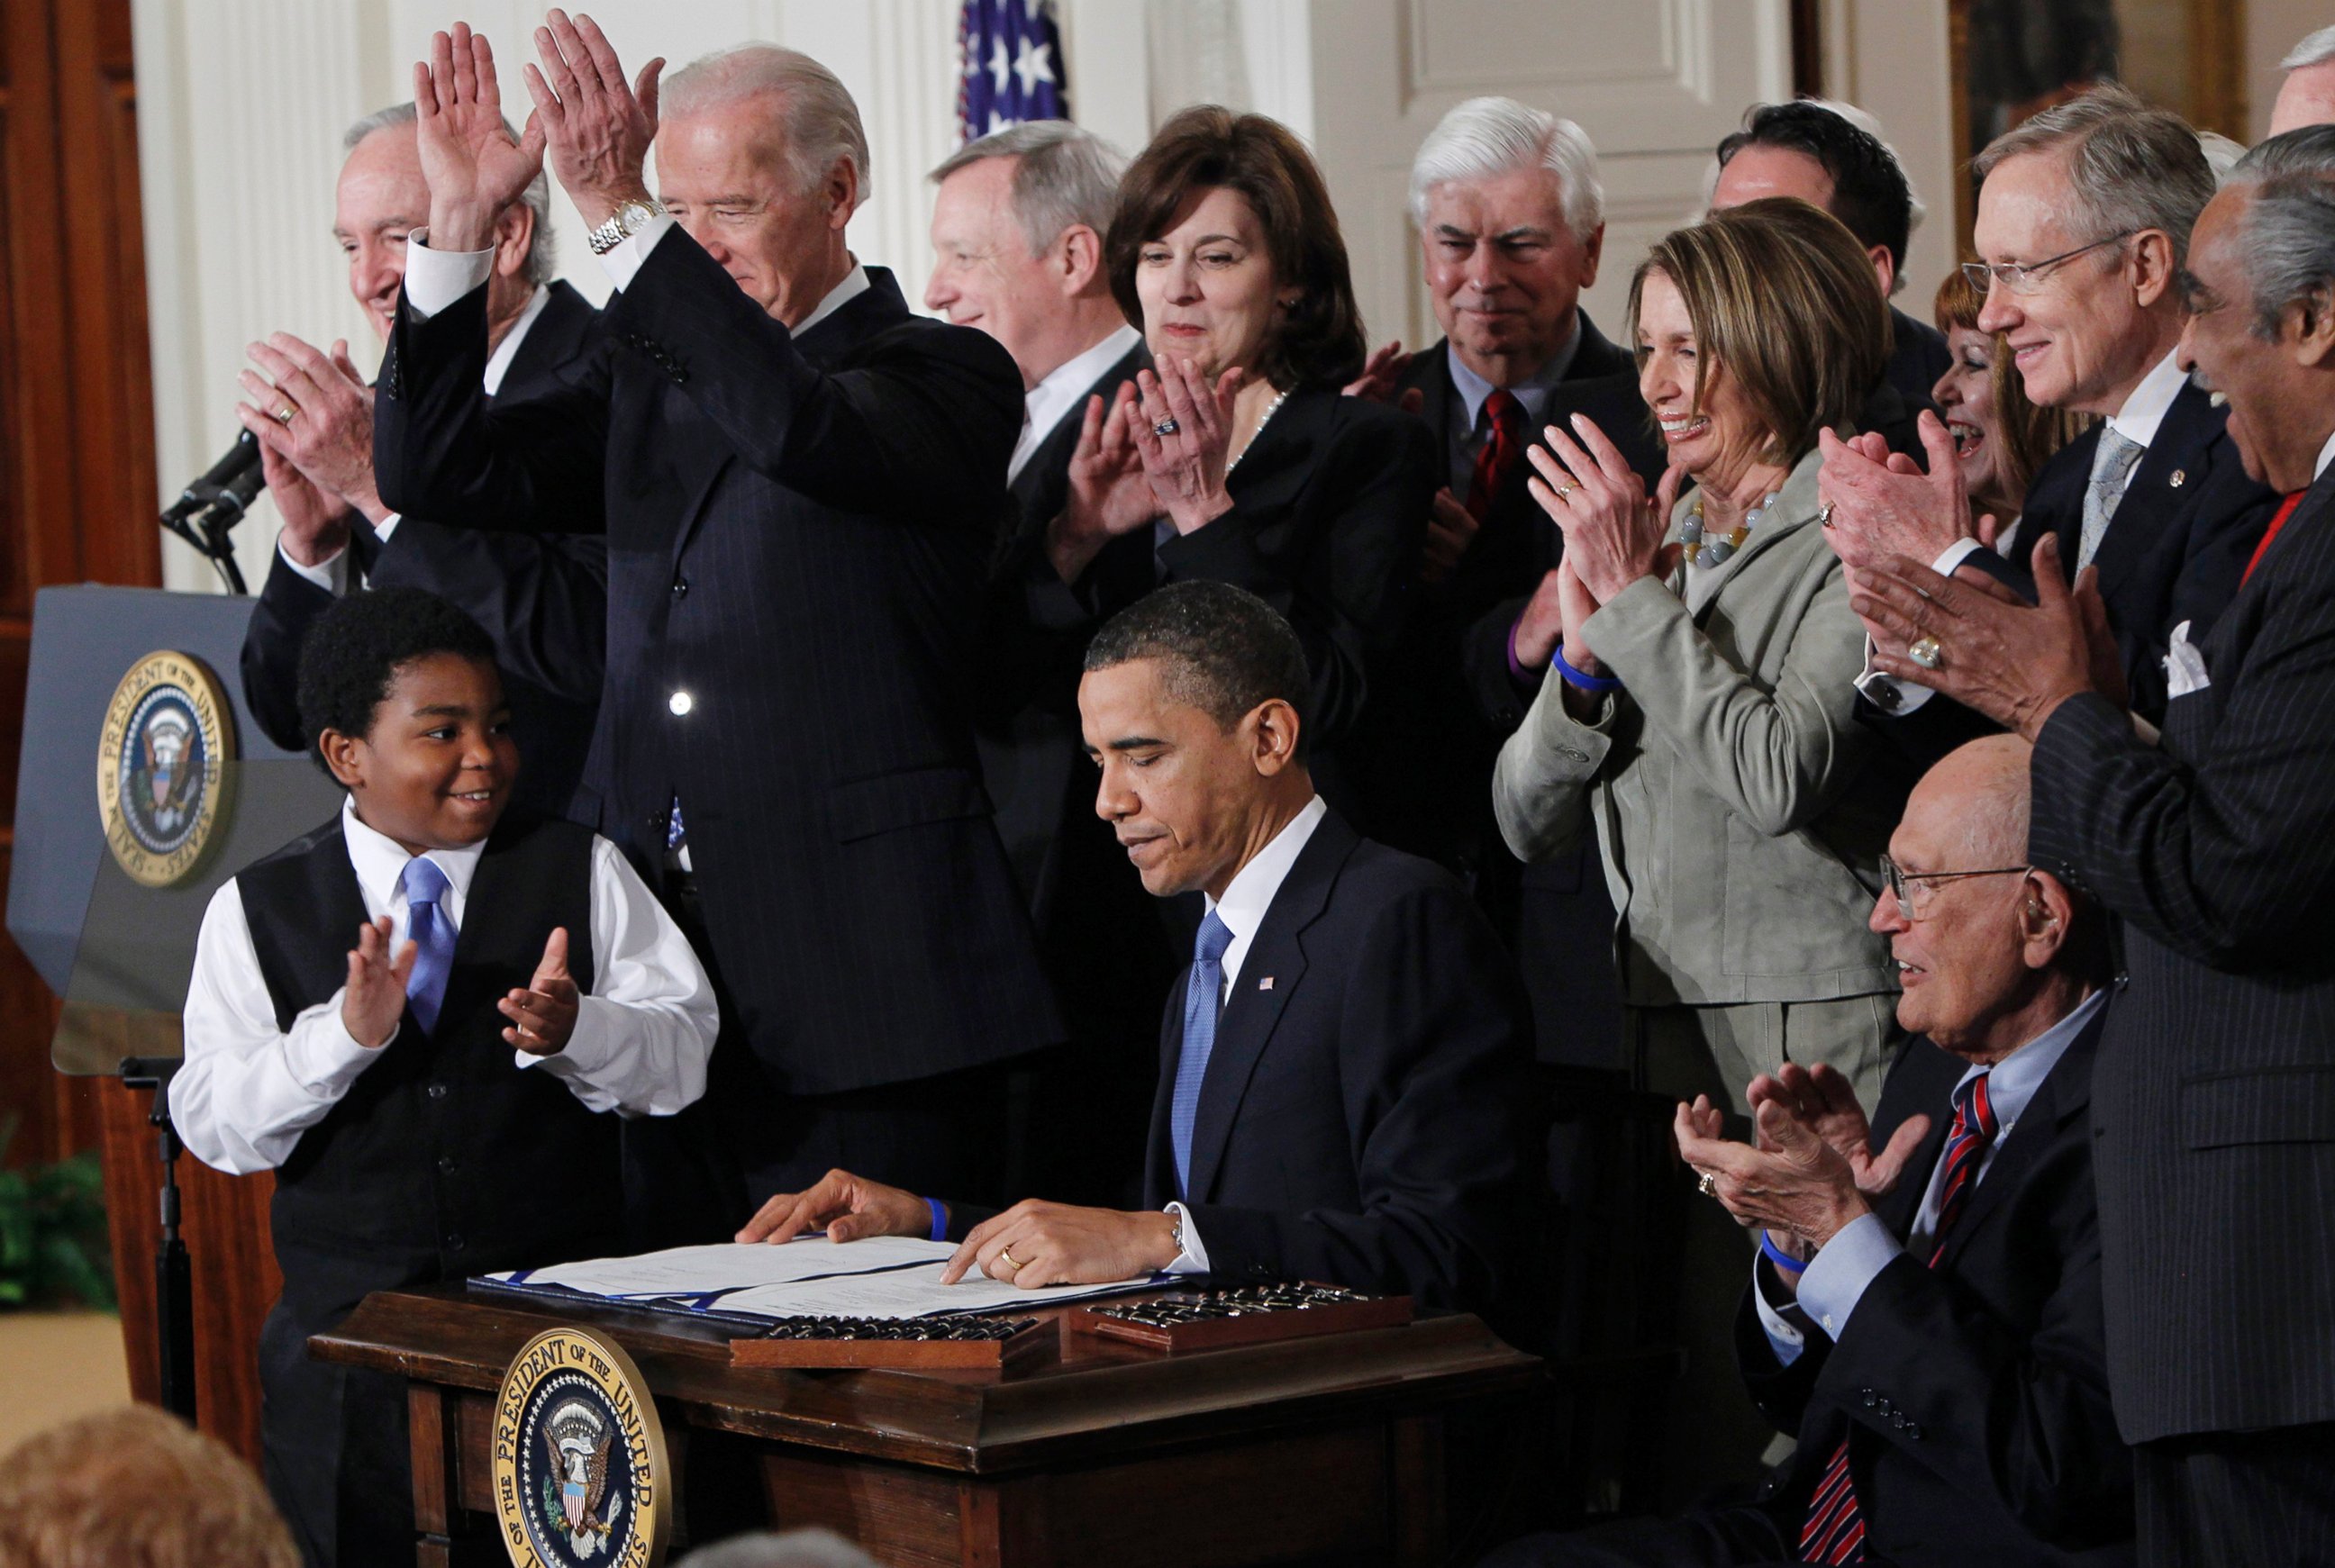 PHOTO: President Barack Obama is applauded after signing the Affordable Care Act into law in the East Room of the White House on March 23, 2010.  